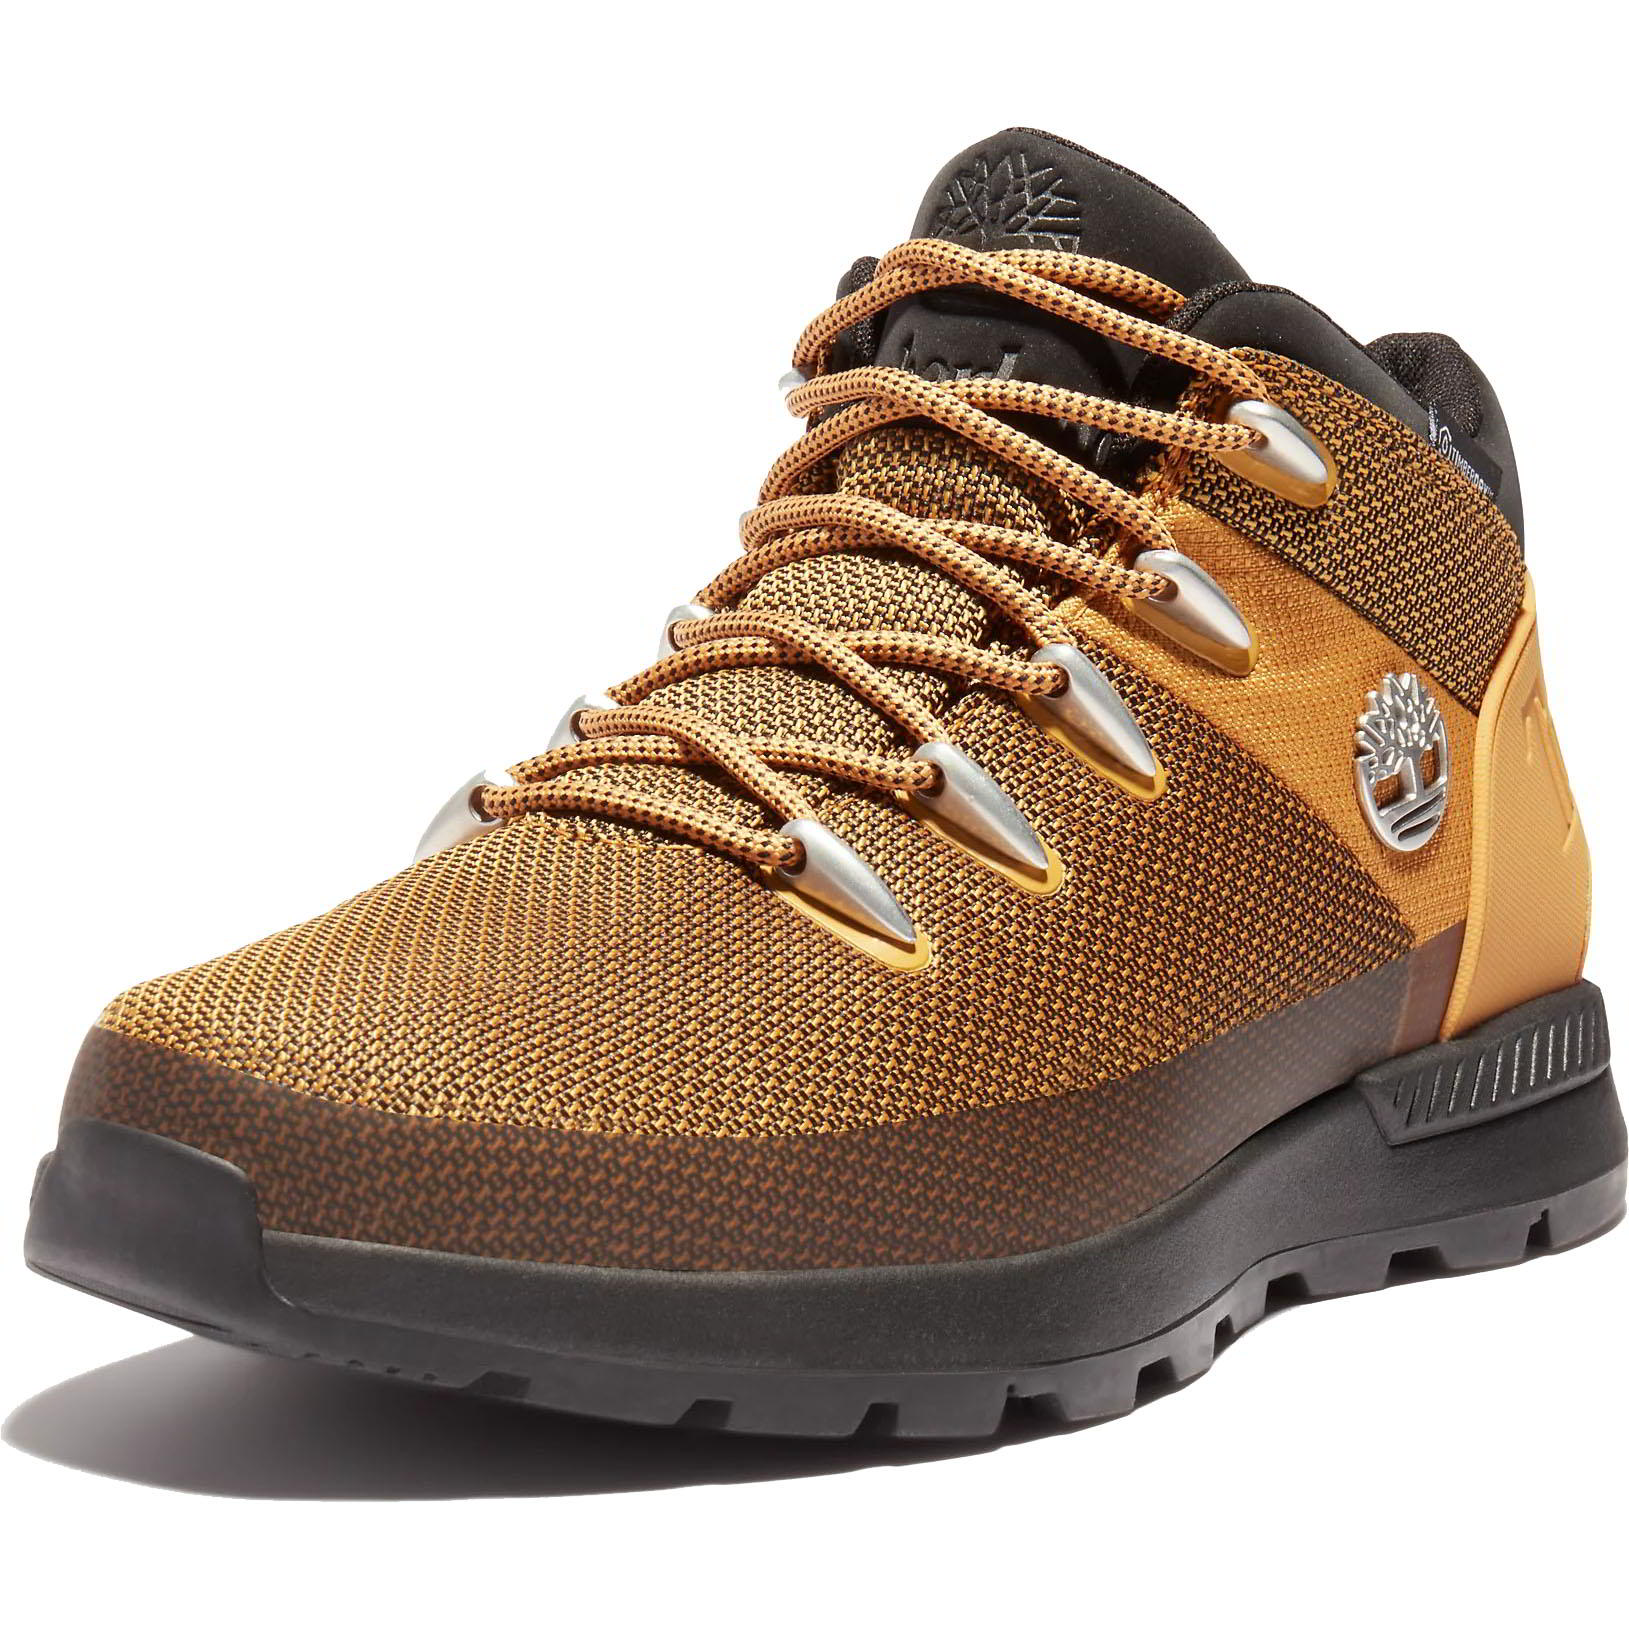 Timberland Mens Sprint Trekker Mid Waterproof Ankle Boots - Wheat A26EH 2951